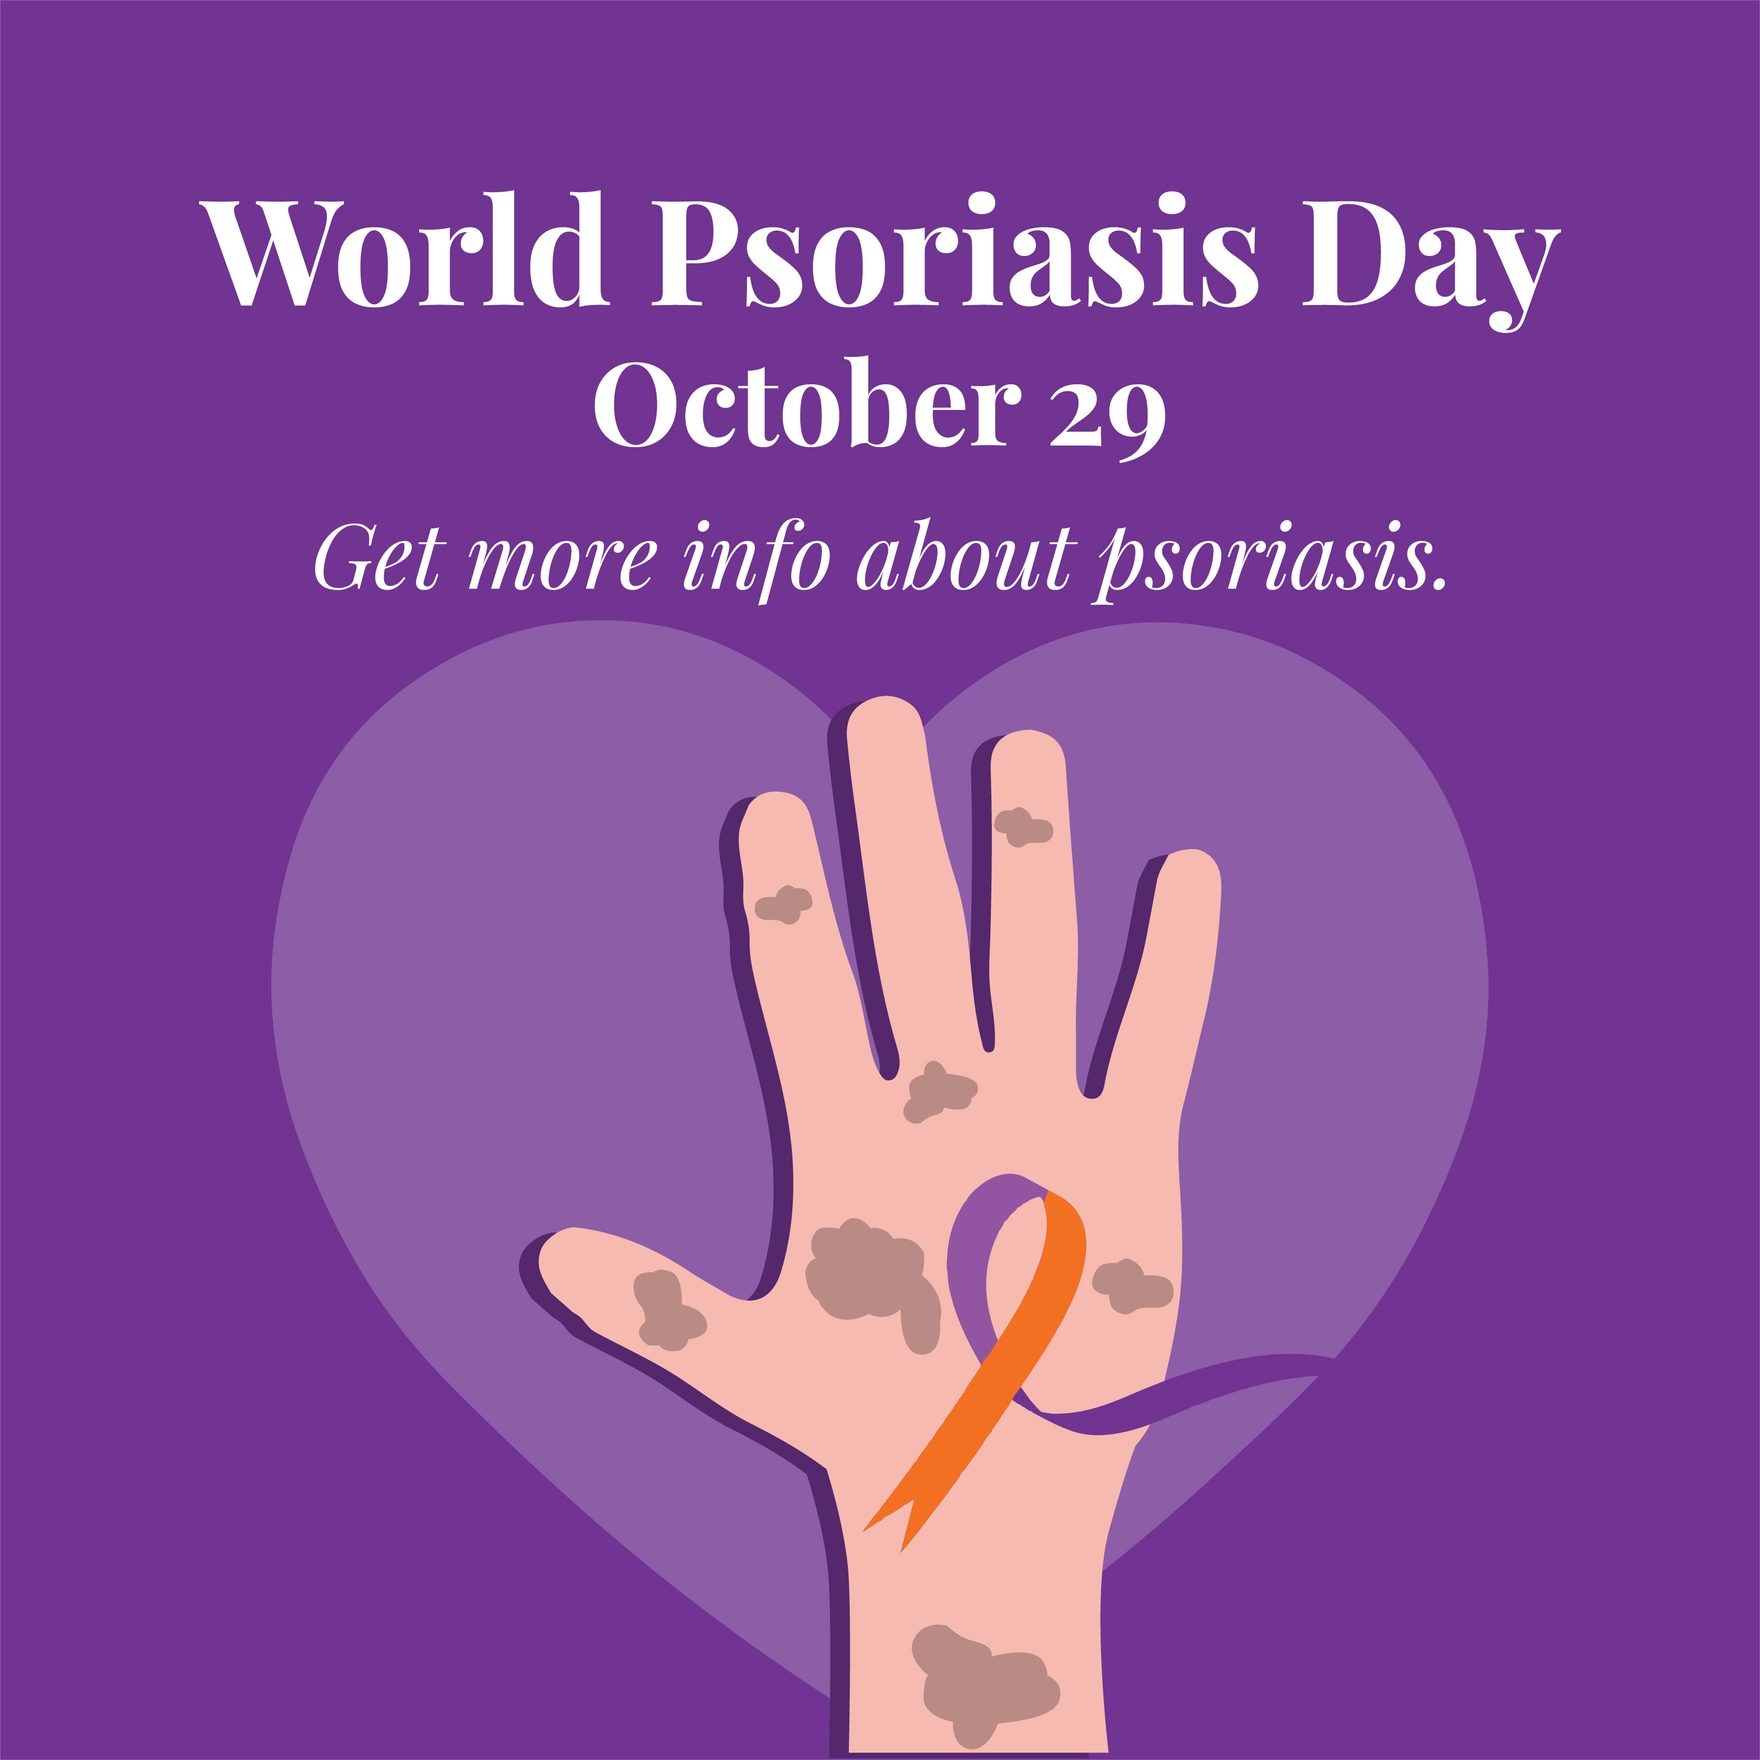 Free World Psoriasis Day WhatsApp Post in Illustrator, PSD, EPS, SVG, JPG, PNG